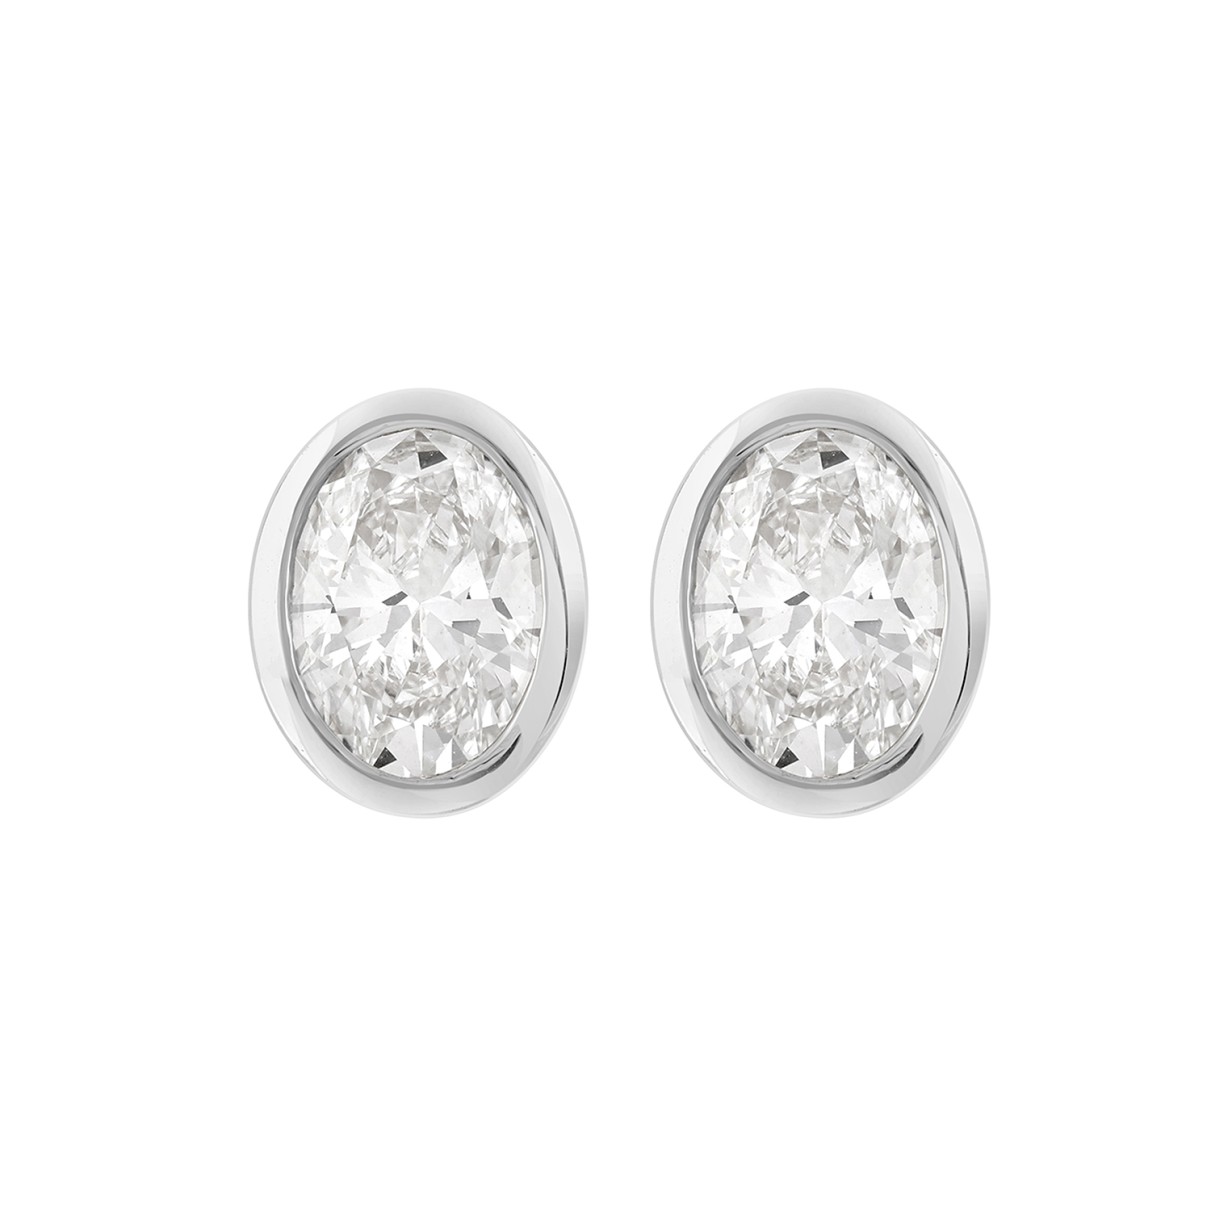 LADIES SOLITAIRE EARRING 3CT OVAL DIAMOND 14K WHIT...